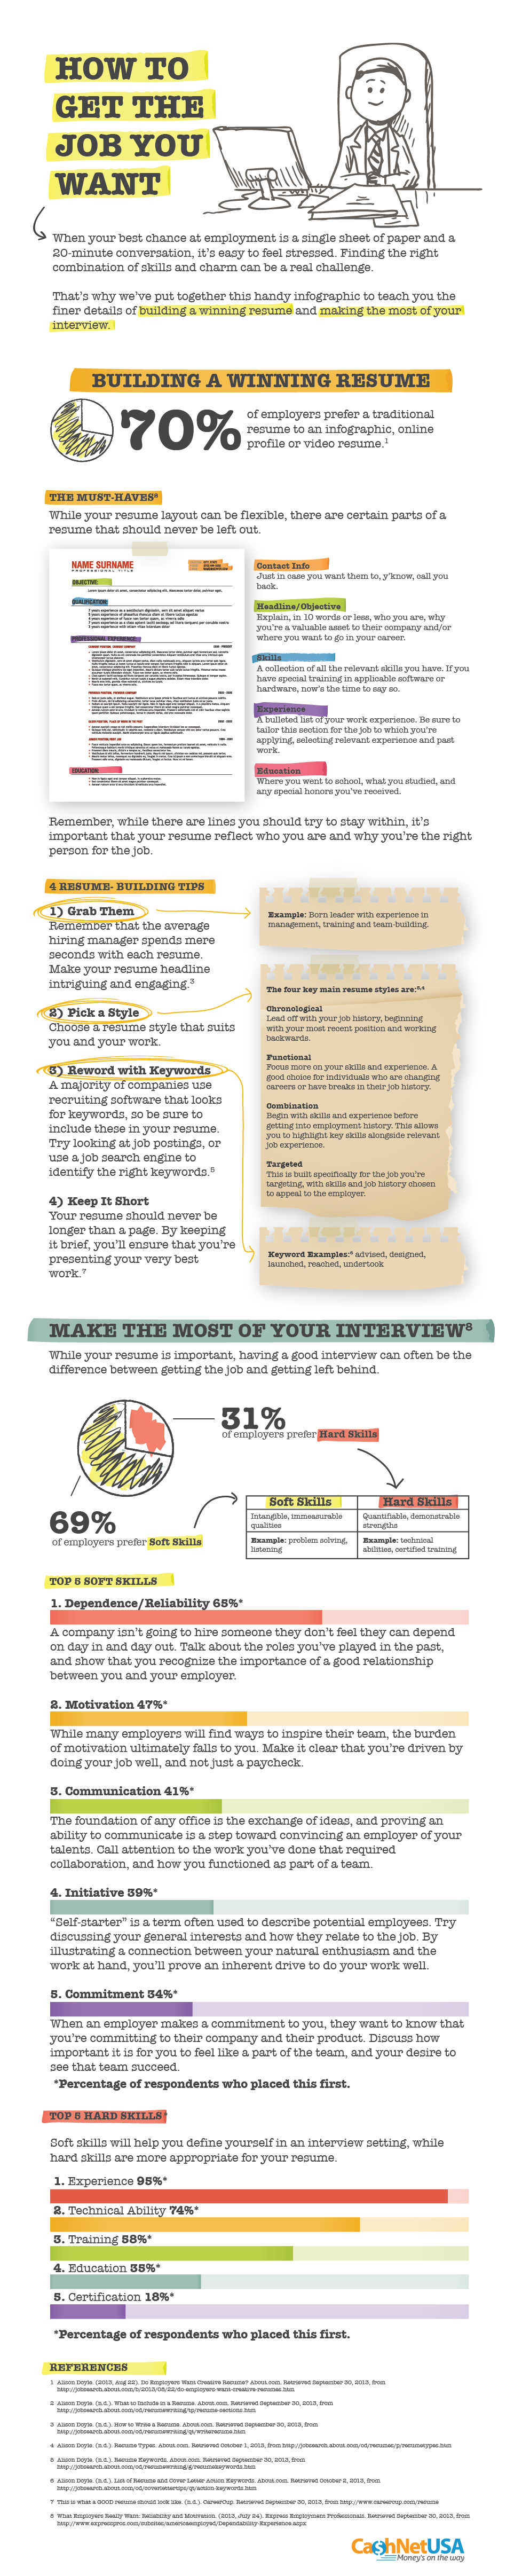 How to get the dream job- infographic